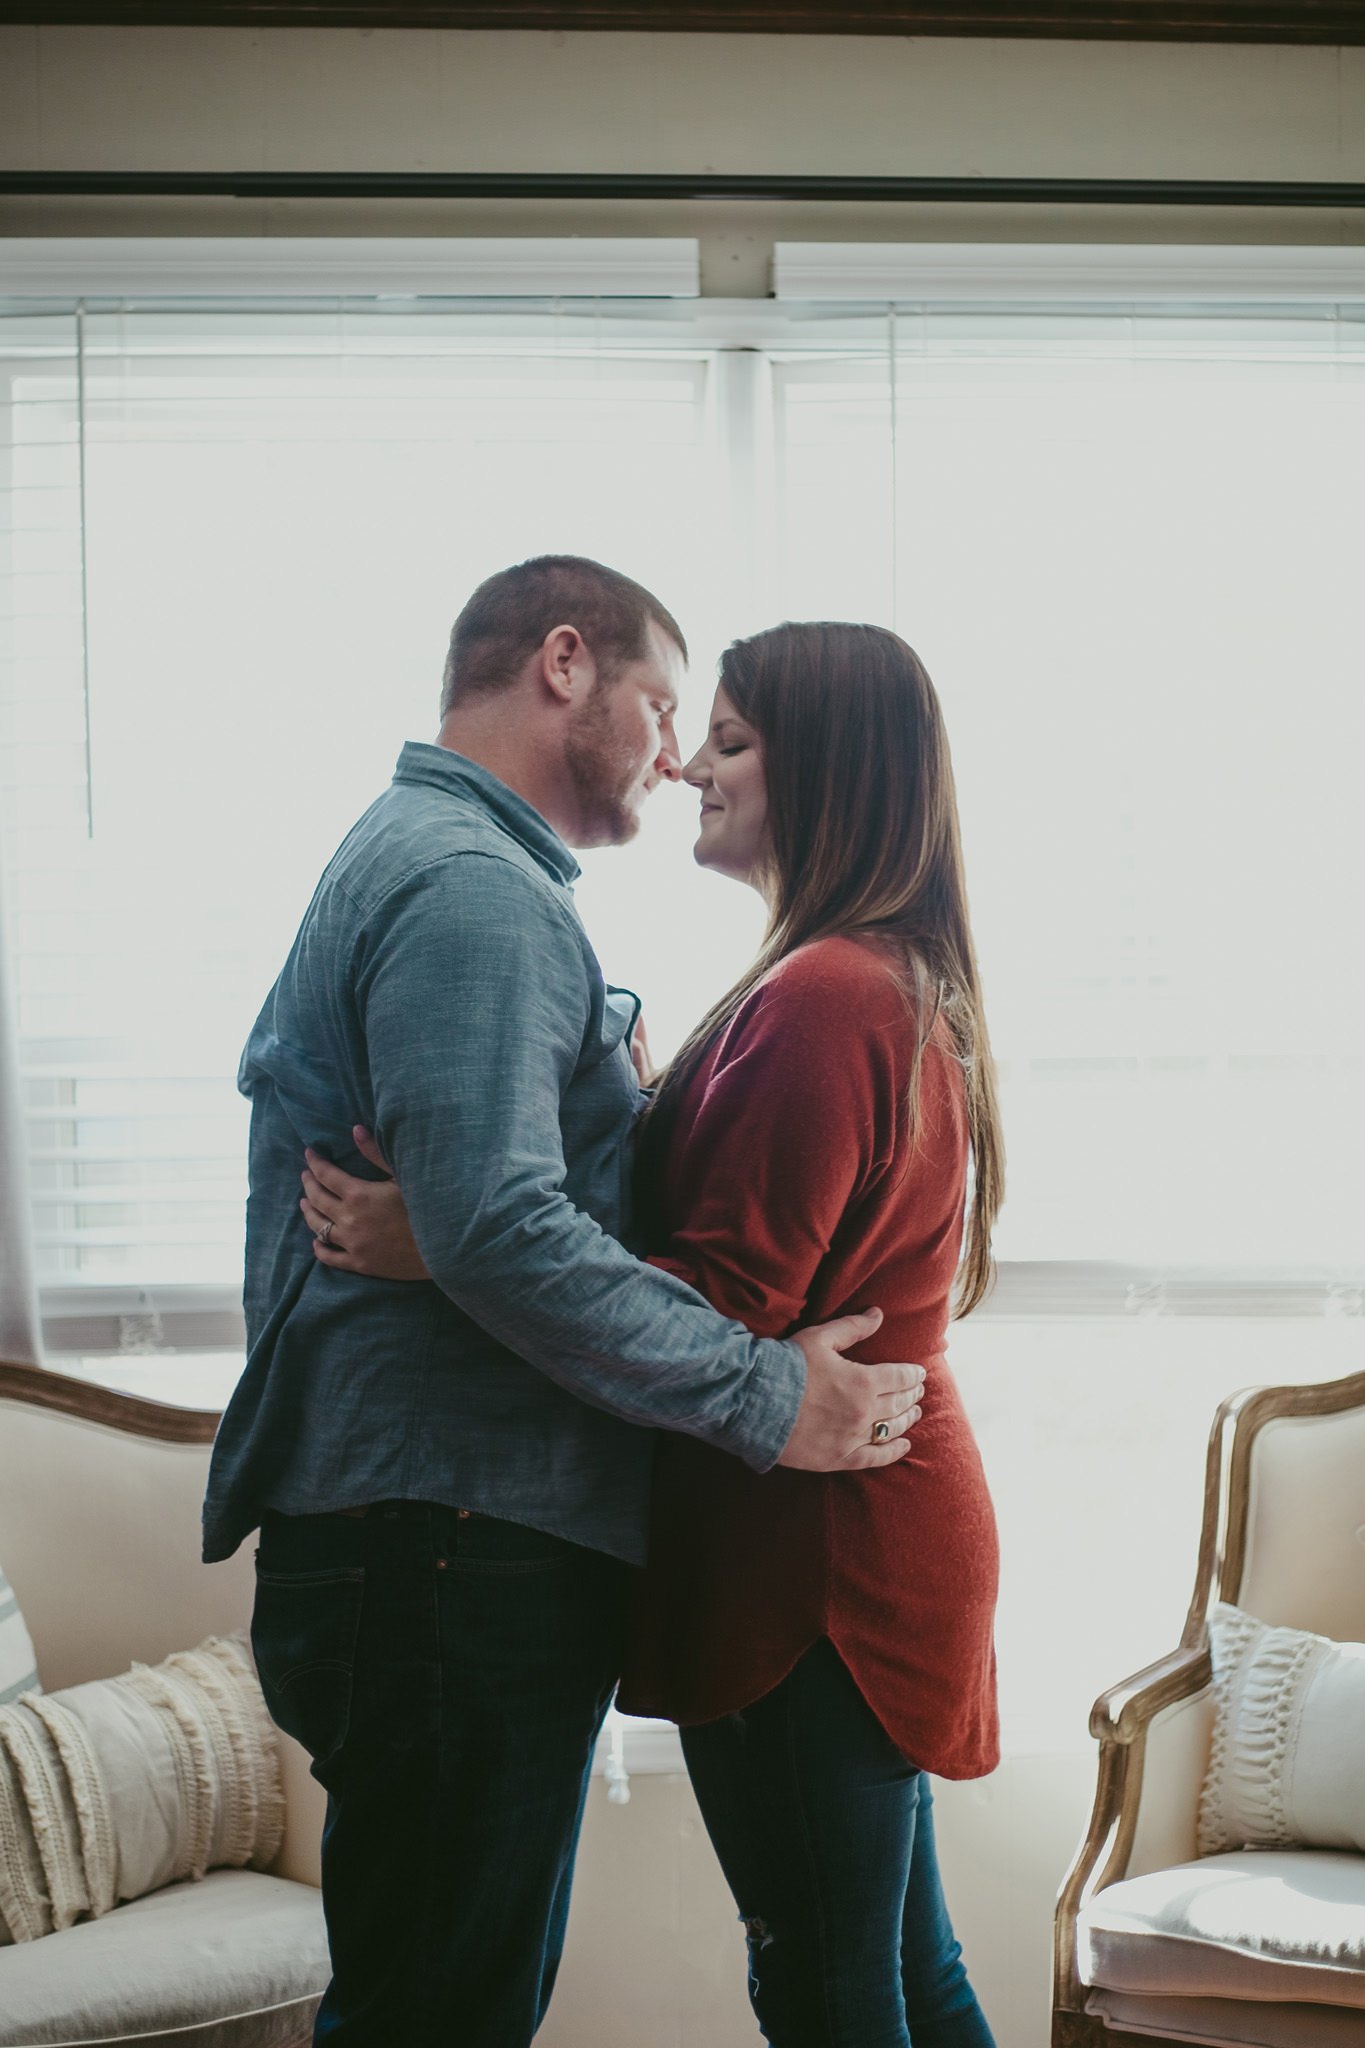 Lauren and Adam had their engagment session right in their own home near Charlotte, NC